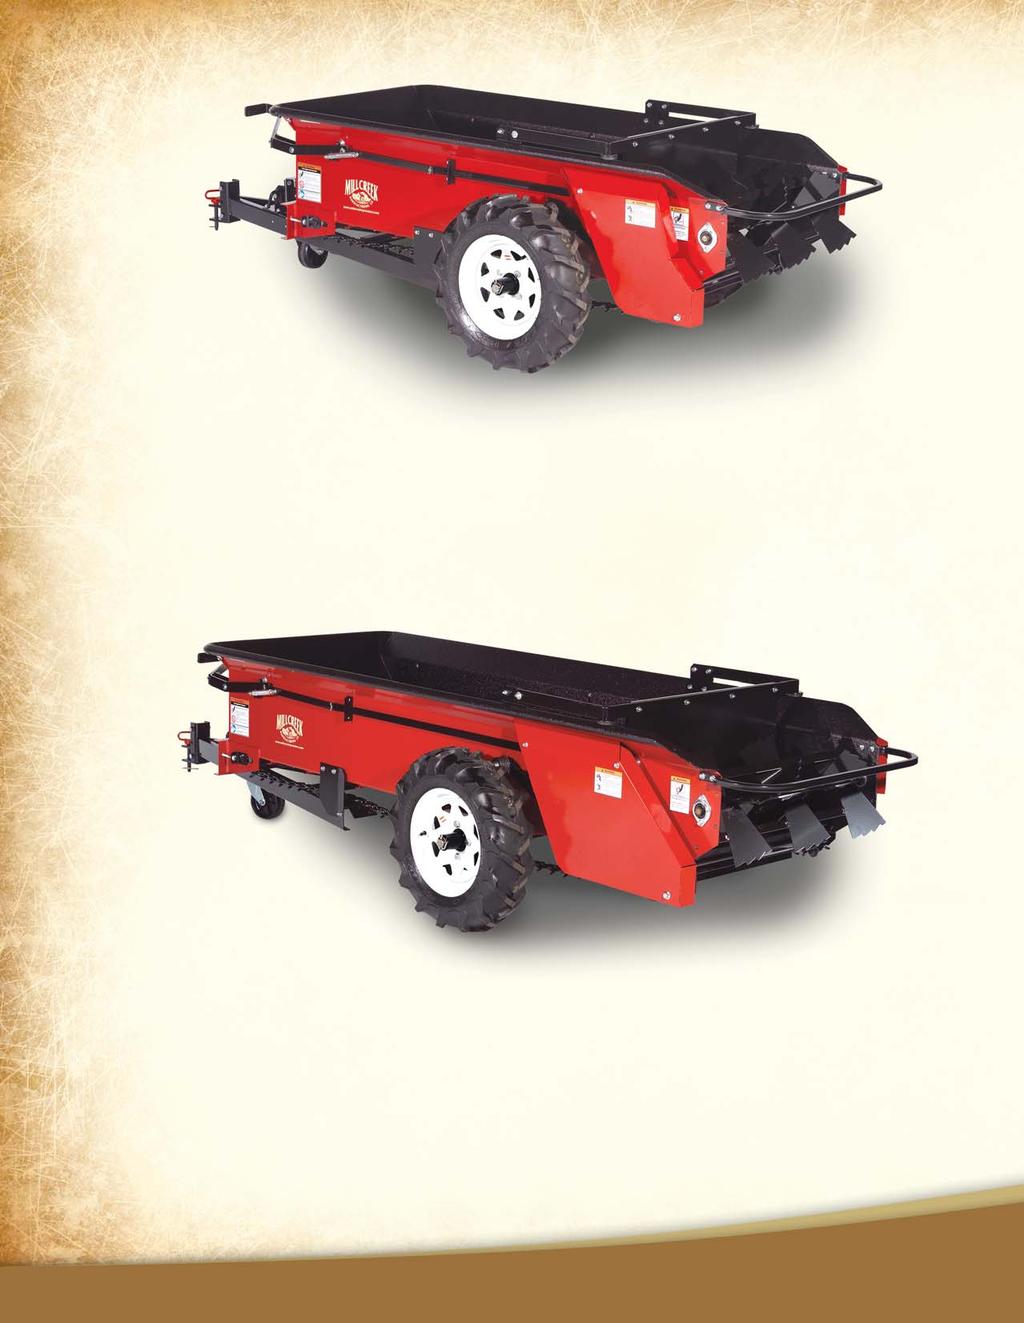 Model 27+ (28 cubic feet, or 22.5 bushel capacity) For up to 4 horses The world s most popular equine spreader since 1985, the Millcreek Model 27+ blazed the trail to faster and easier stall cleaning.